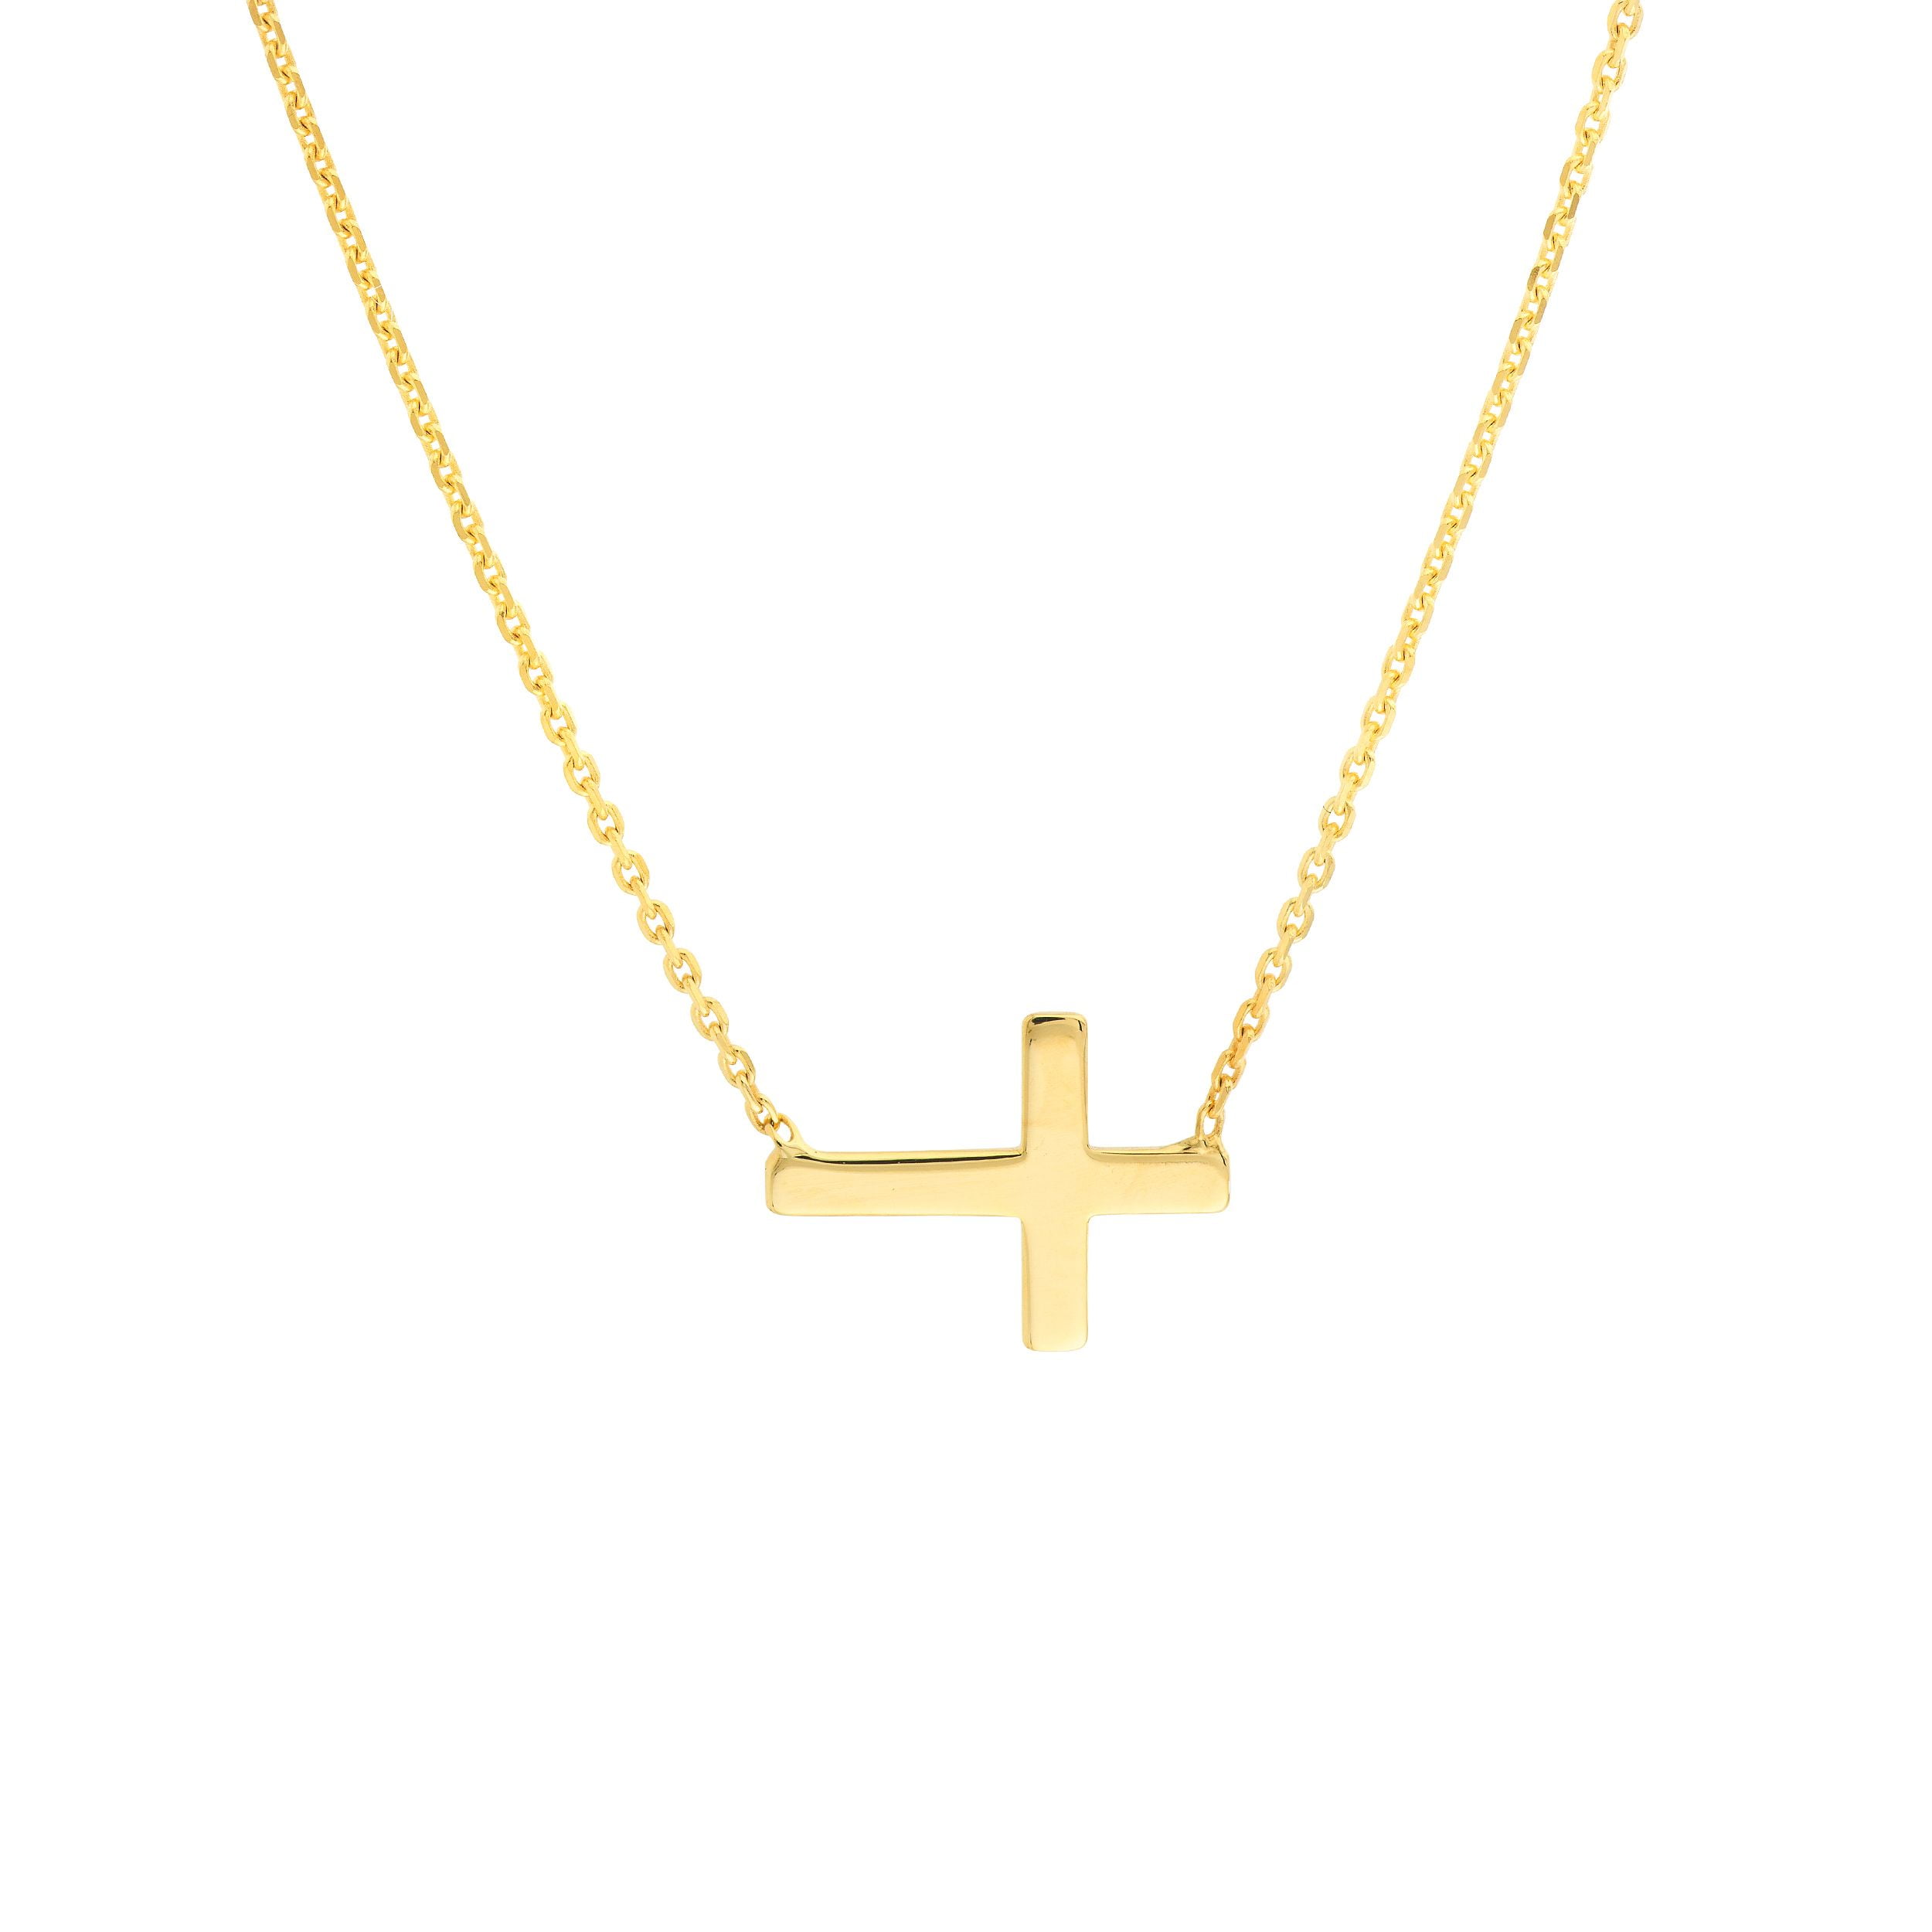 Gold Cross Necklace Dainty Sideways Cross Necklace Mother's Day Gift Horizontal Small Cross Pendant Religious Cross Necklace for Her